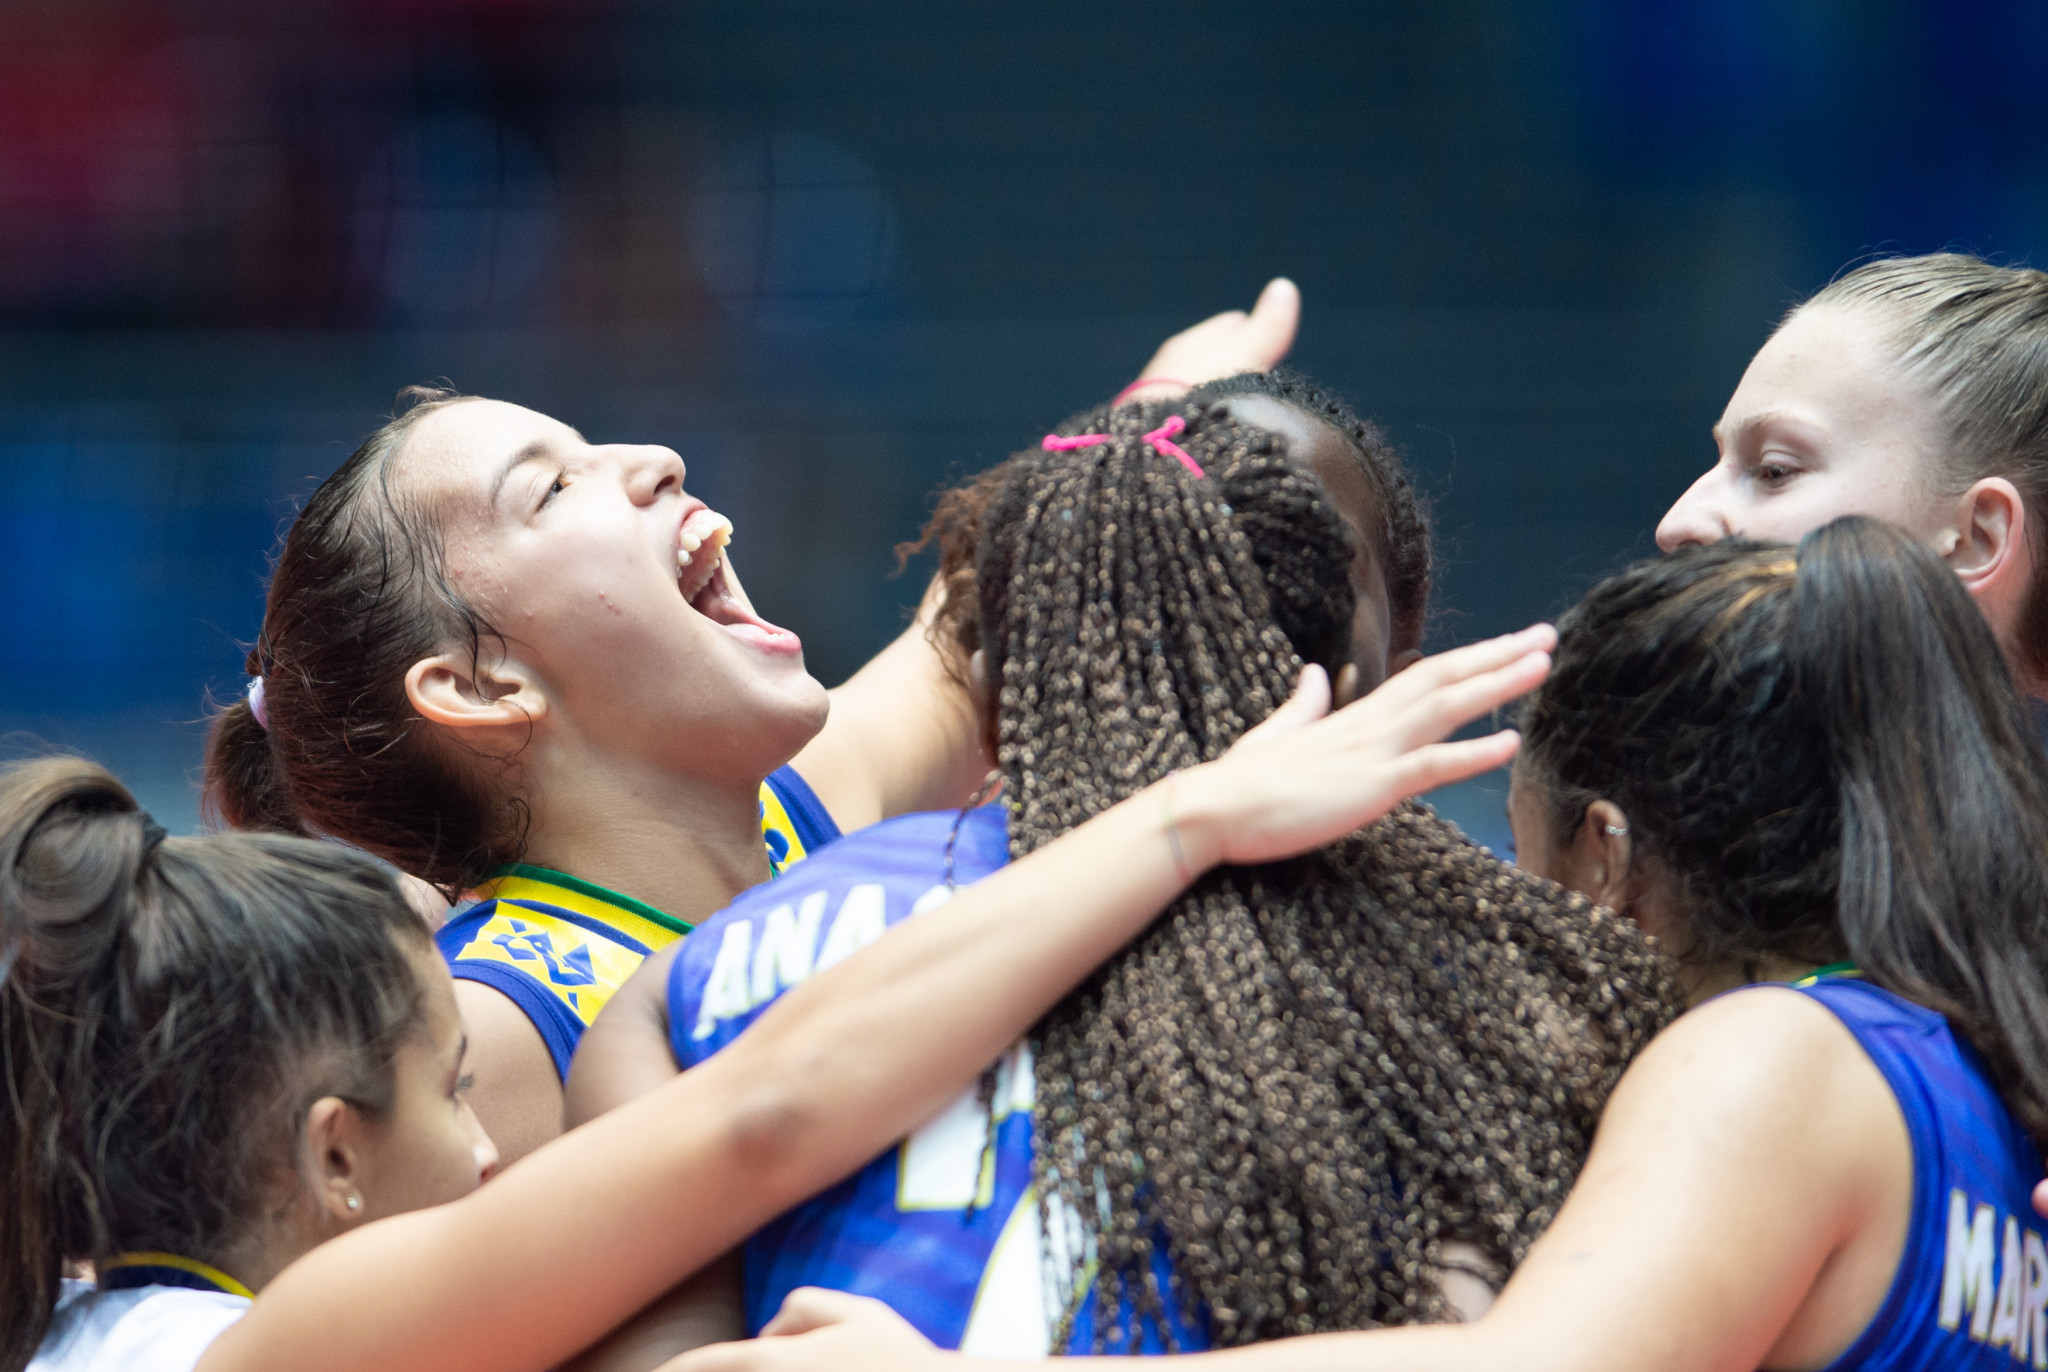 Three-times world champions Brazil enjoy the feel of a 3-0 win over Cameroon in their pool match today at the FIVB Girls' U18 World Championship in Egypt ©FIVB